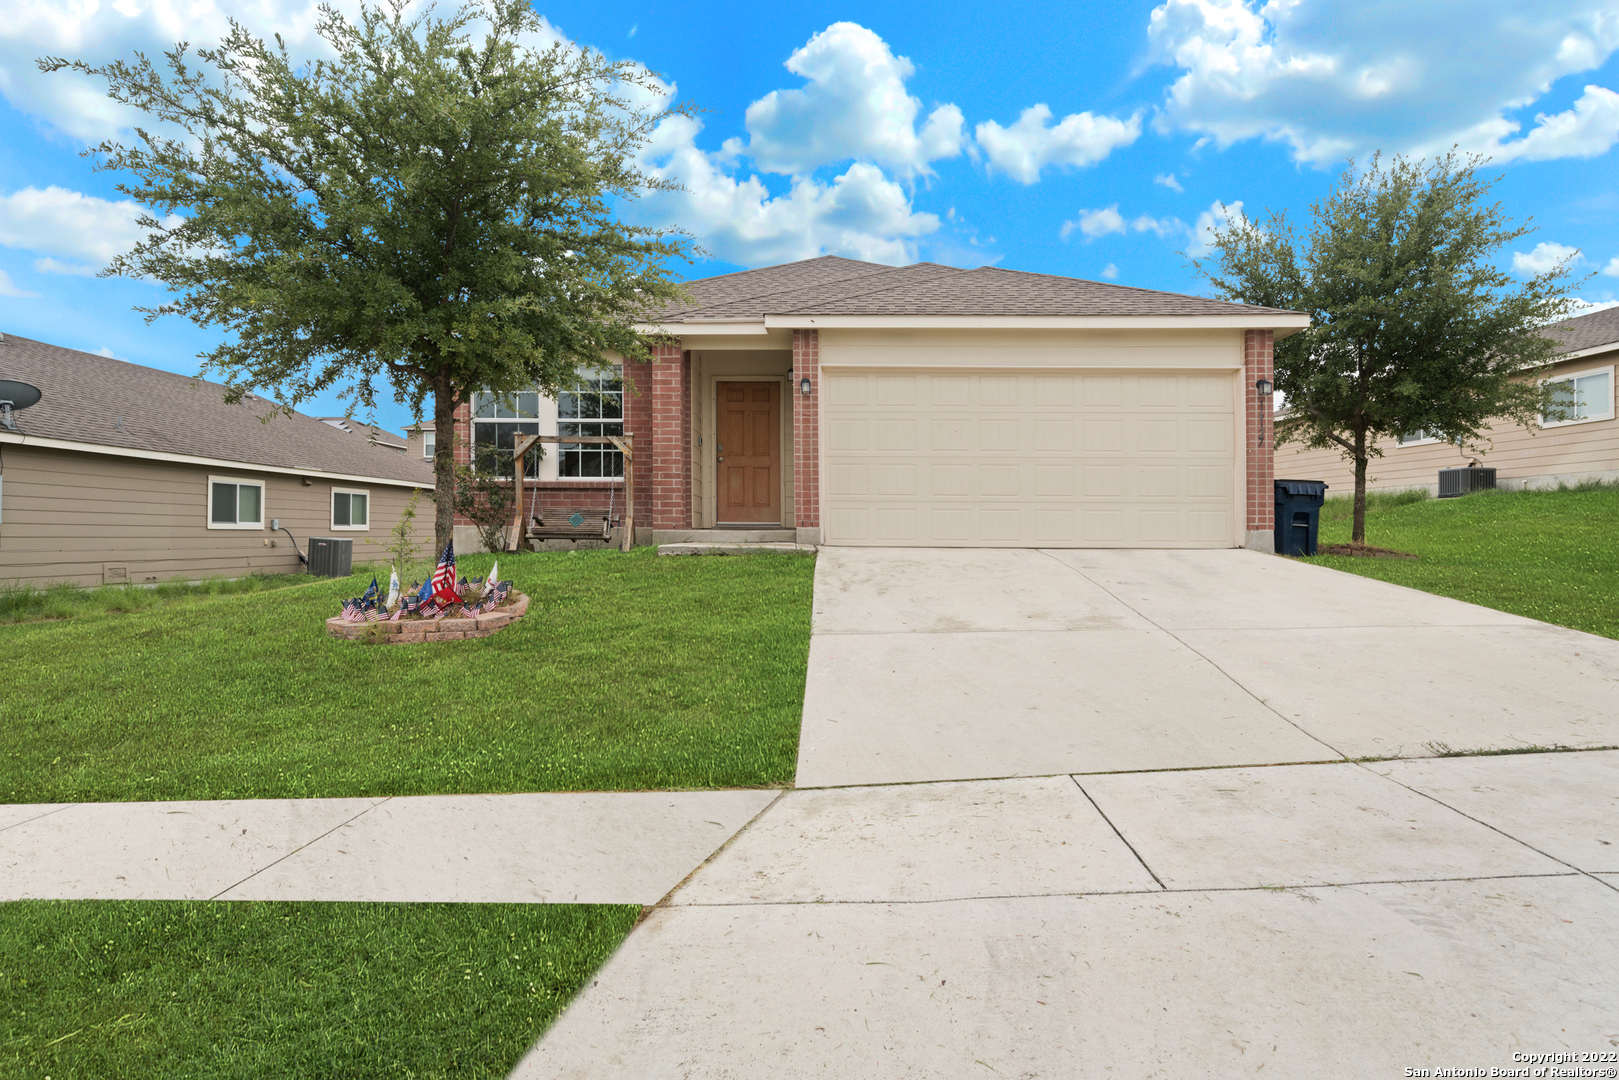 OPEN HOUSE MONDAY (9/5) FROM 10 AM TO 2 PM. Don't miss out on this beautiful single story home in Retama Springs subdivision. This three bedroom, two bath, two car garage home boasts an open floorplan. The kitchen features stainless steel appliances and it opens up to a very large living area that is perfect for entertaining. The home features ceramic tile flooring, extra bonus room that can be a second living space or second dining space.   This home is just a few minutes from Randolph Air Force Base, the Forum shopping, IKEA, and the Live Oak City Center.  Schedule a showing today!  This is a fantastic home, in a great neighborhood and close access to Loop 1604 and IH 35.